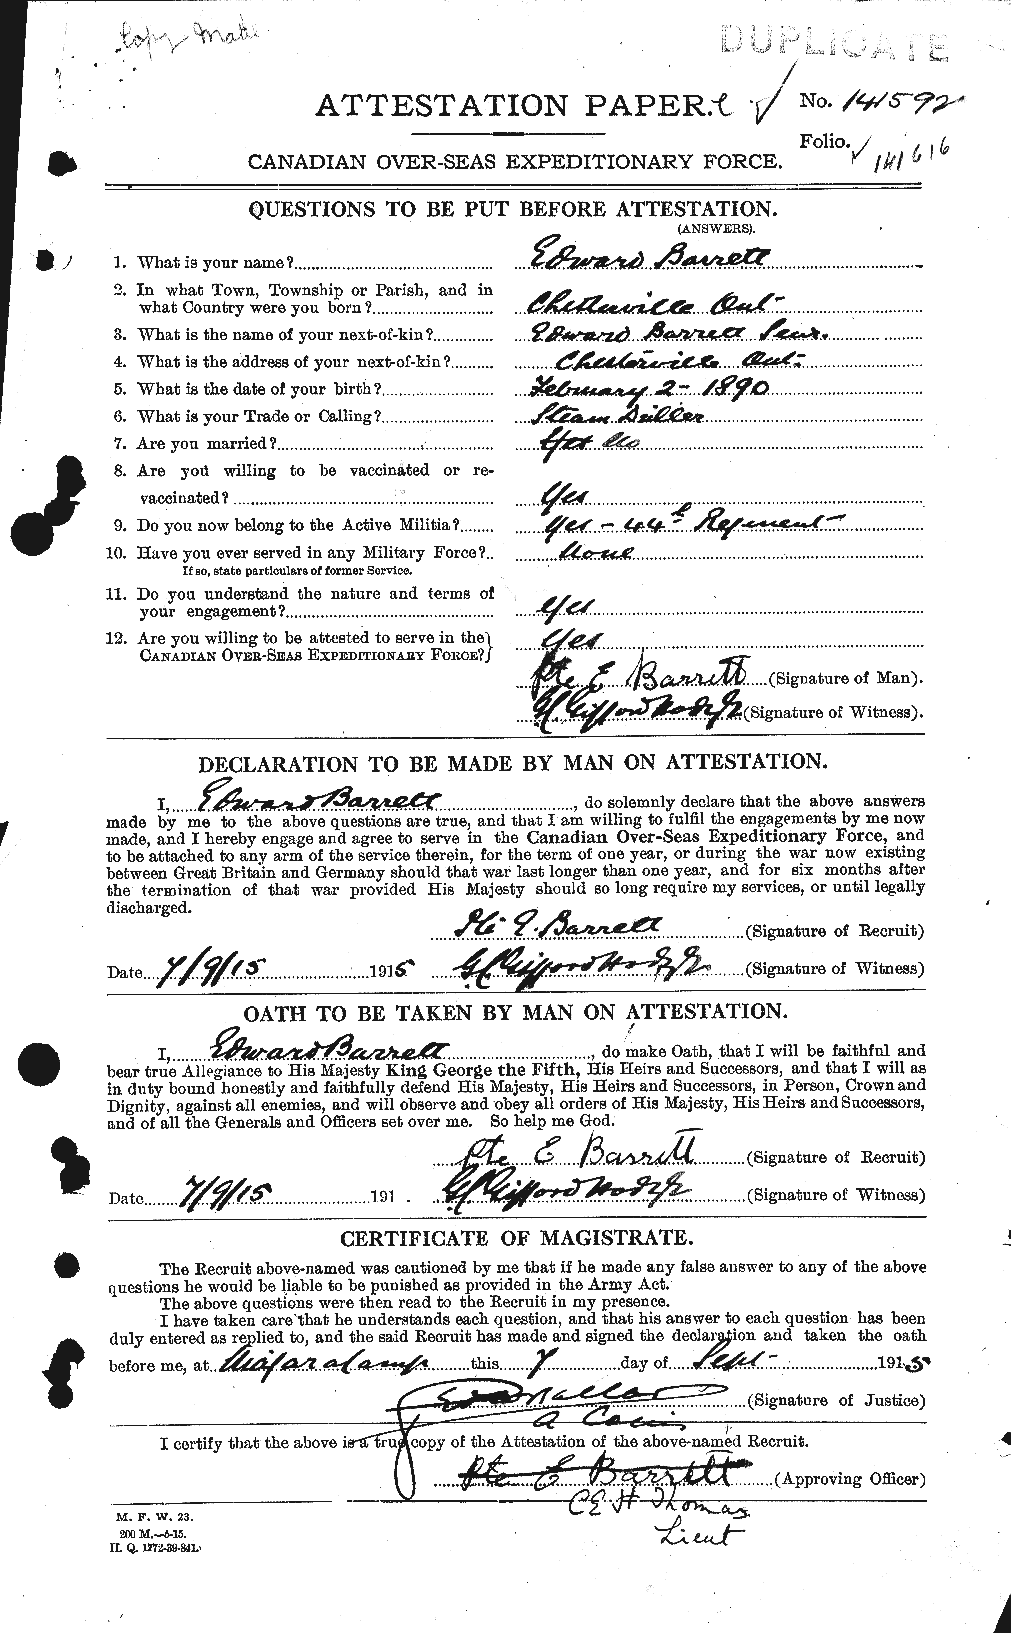 Personnel Records of the First World War - CEF 220359a